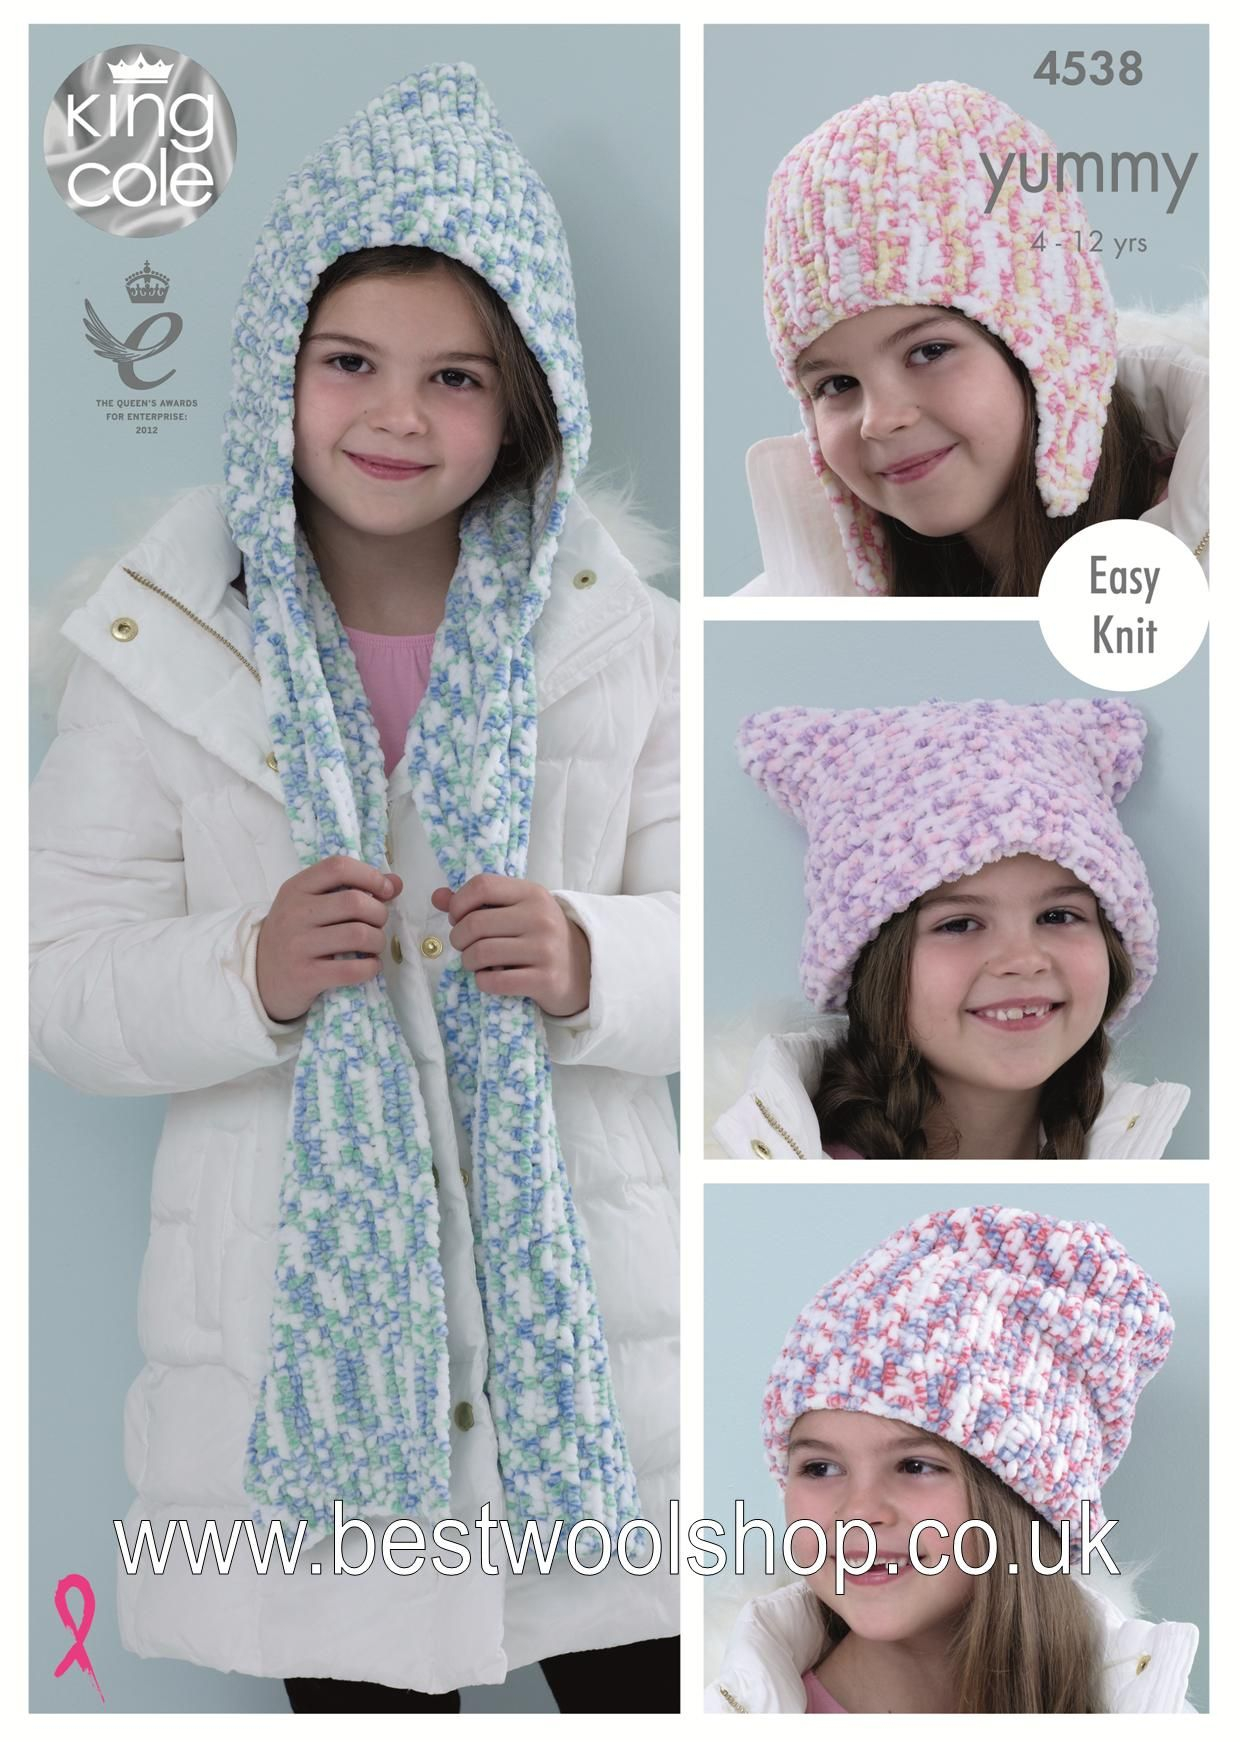 Loom Knit Hooded Scarf Pattern 4538 King Cole Yummy Chunky Easy Knit Hooded Scarf Hat Knitting Pattern 4 Options To Fit 4 To 12 Years